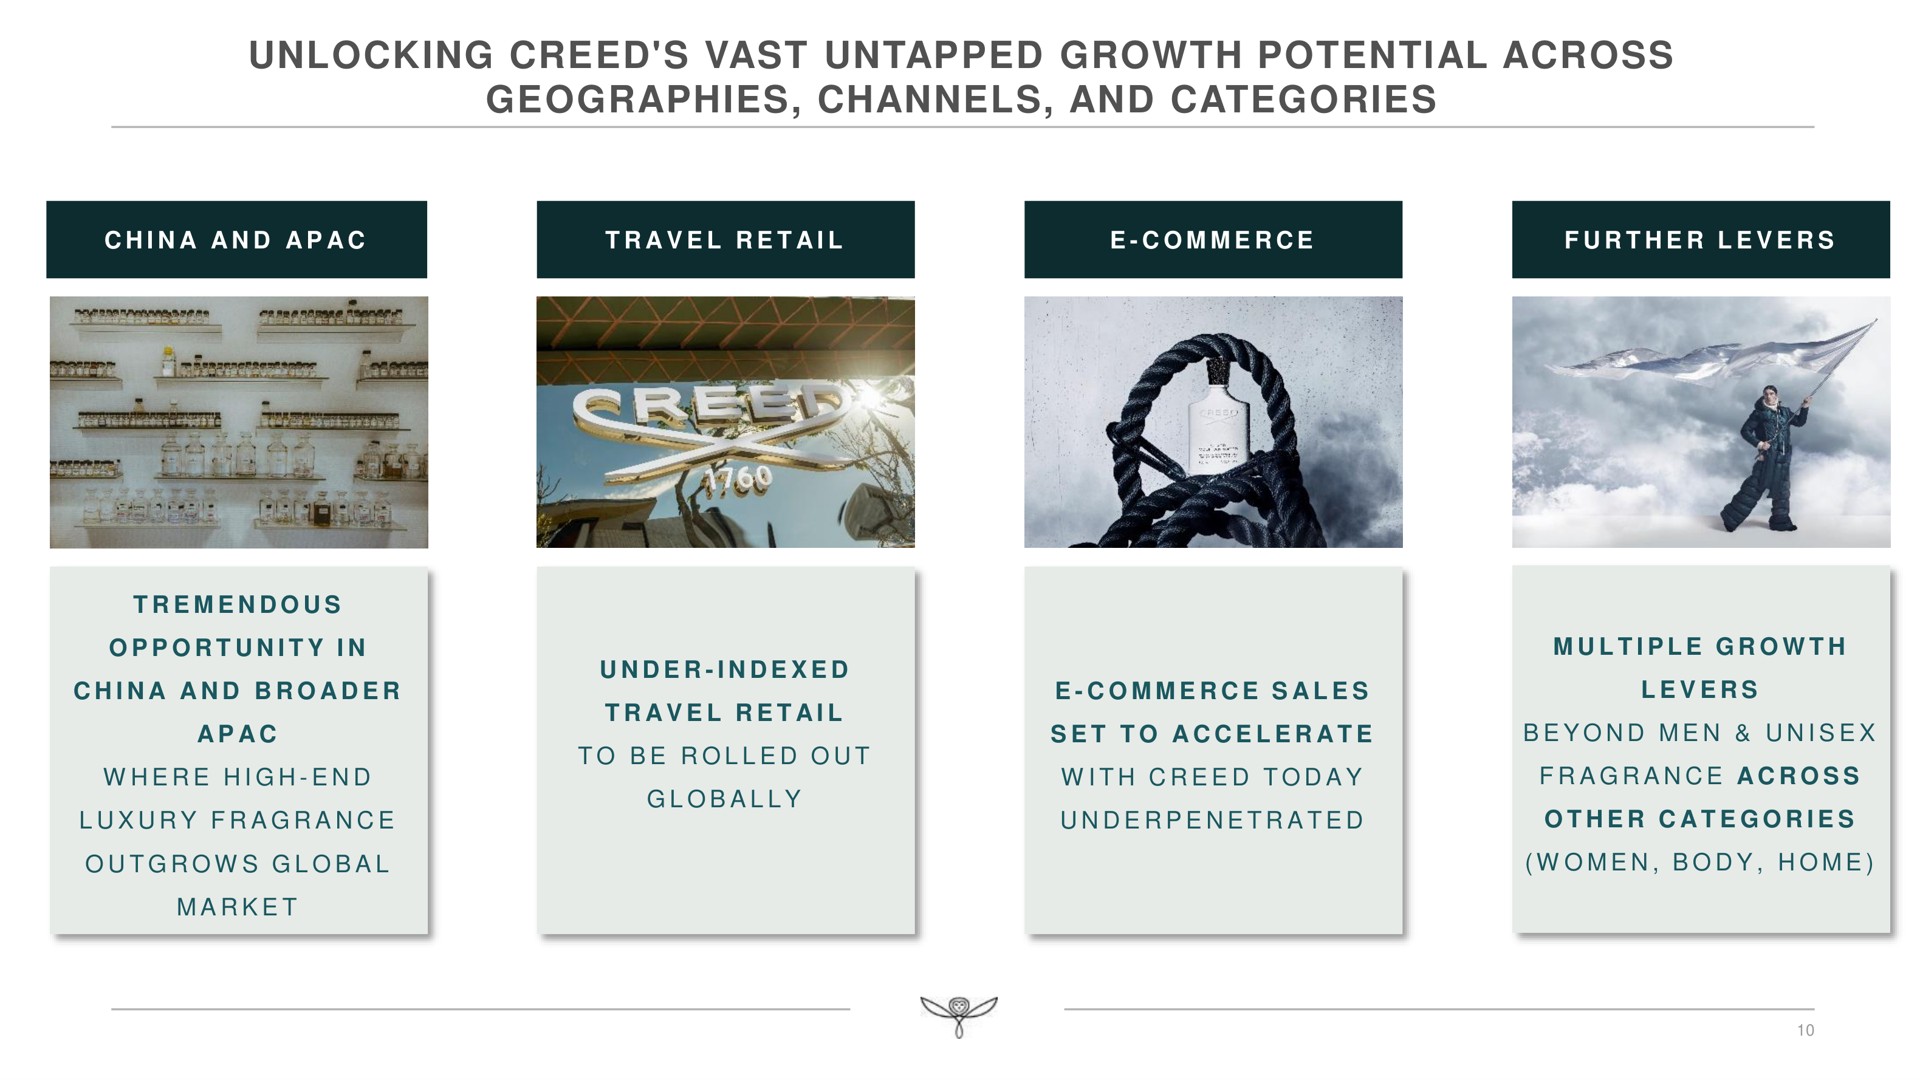 unlocking creed vast untapped growth potential across geographies channels and categories | Kering